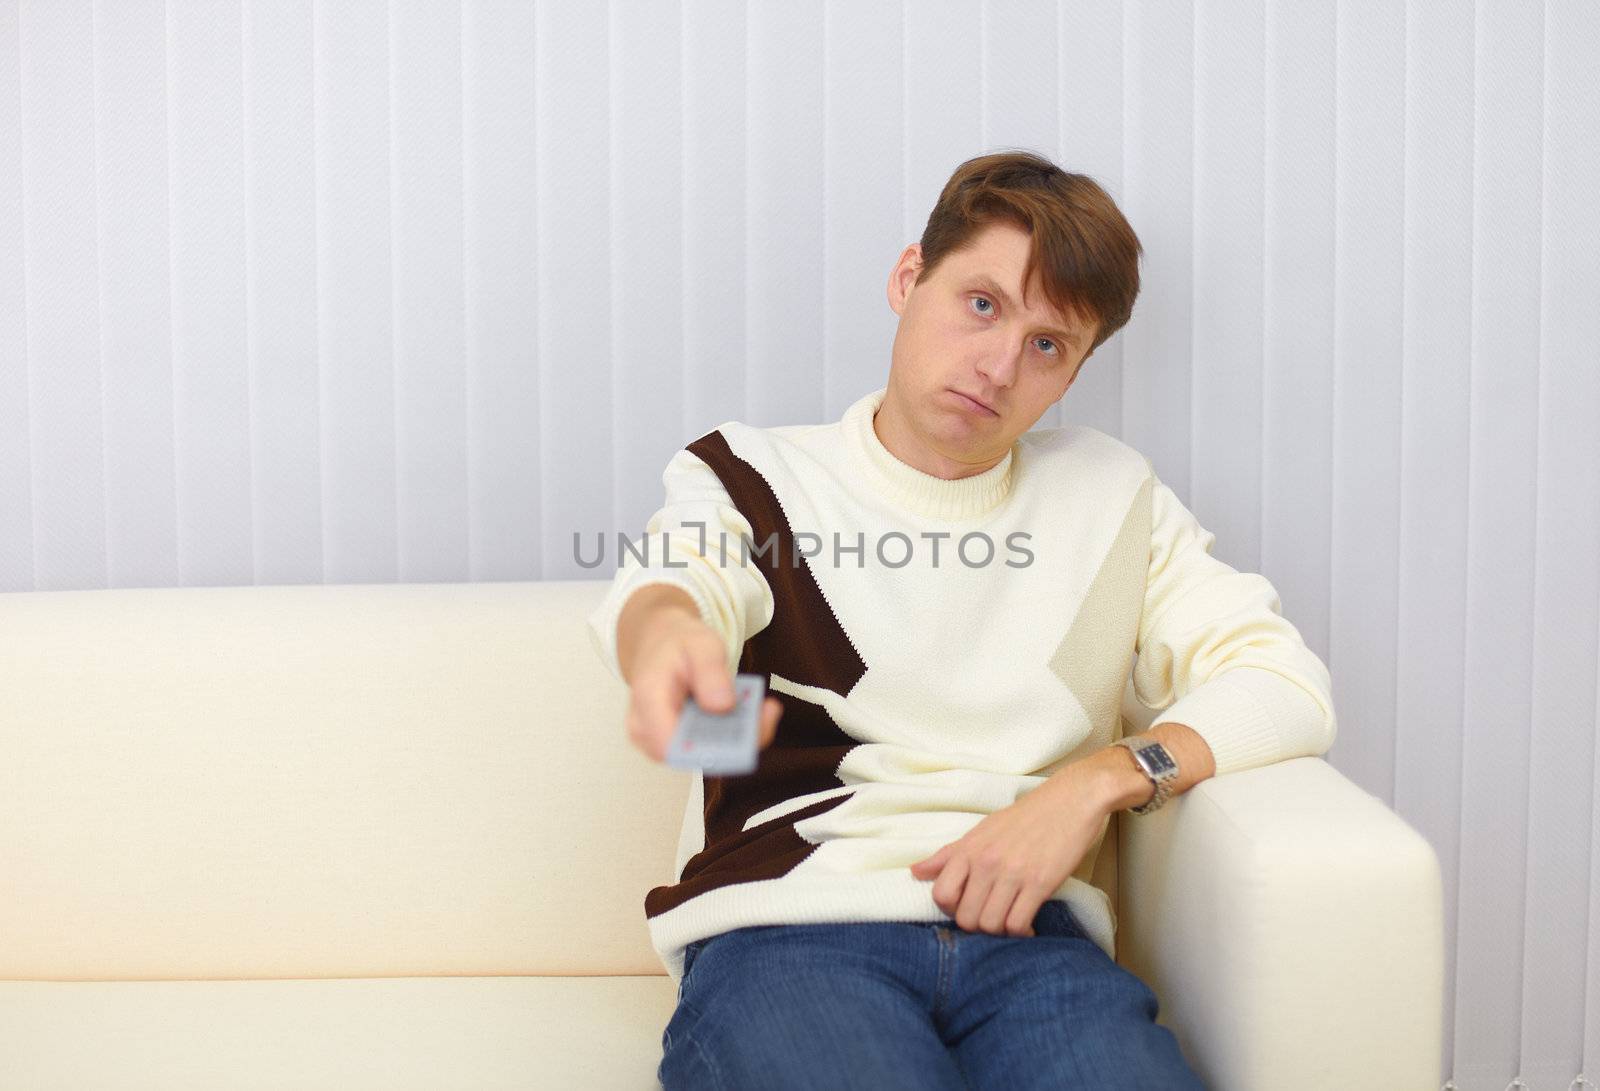 The guy sits on a sofa and watches TV